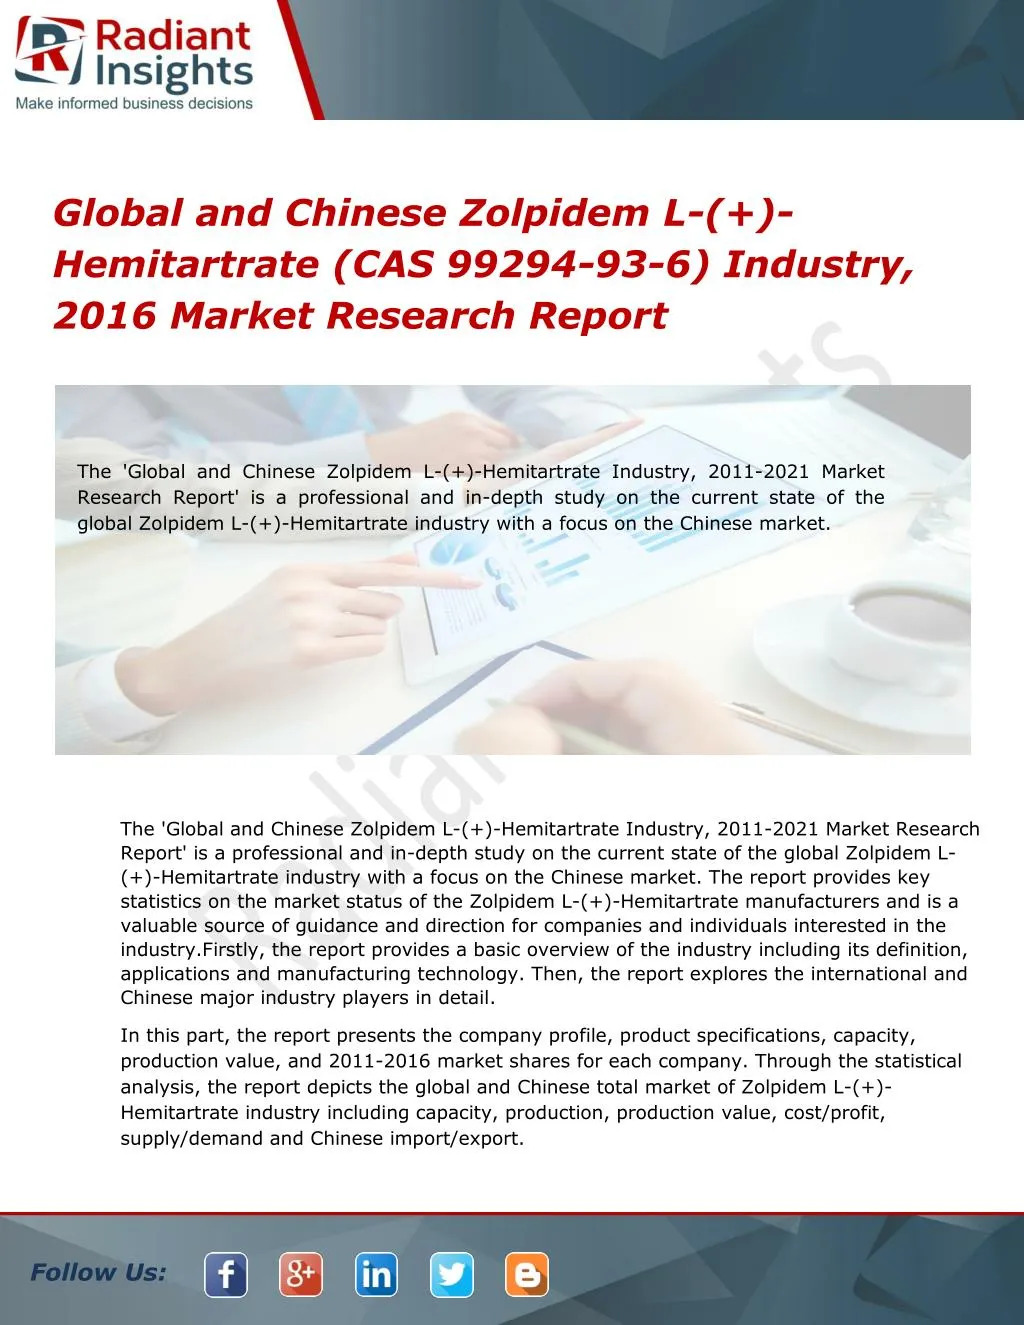 global and chinese zolpidem l hemitartrate